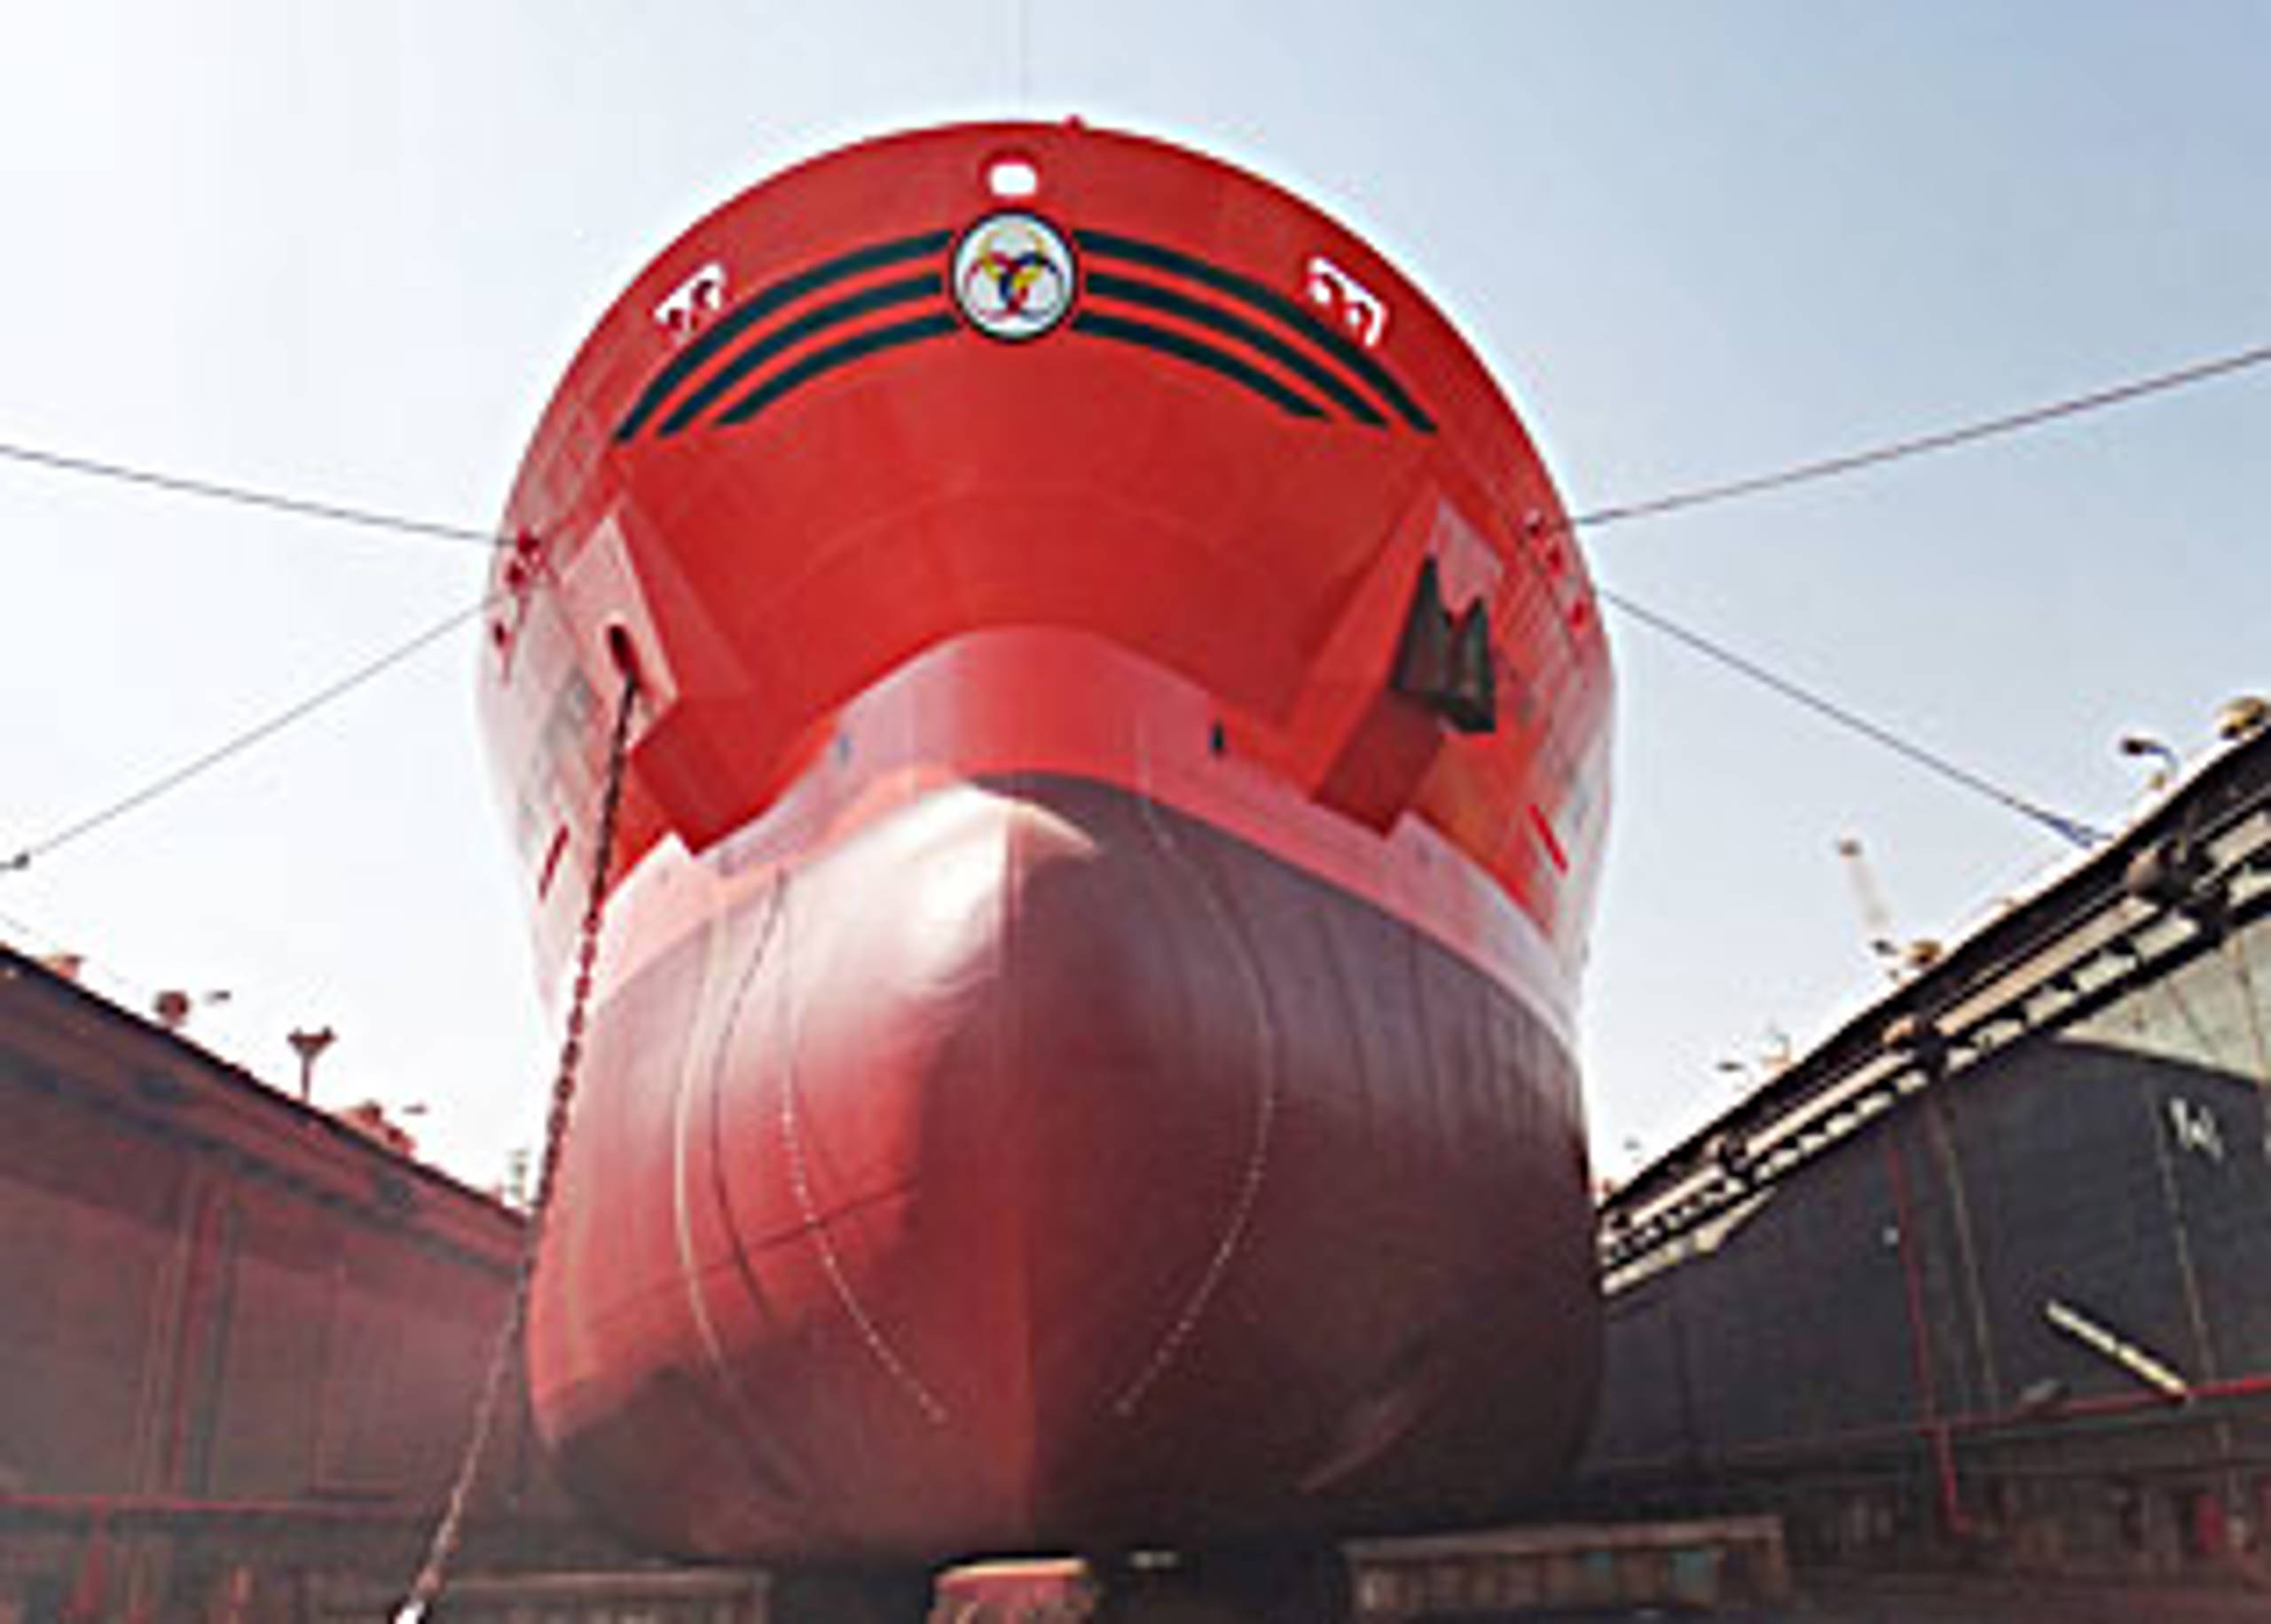 The chemical tanker Bow Clipper at drydock – Jotun reference